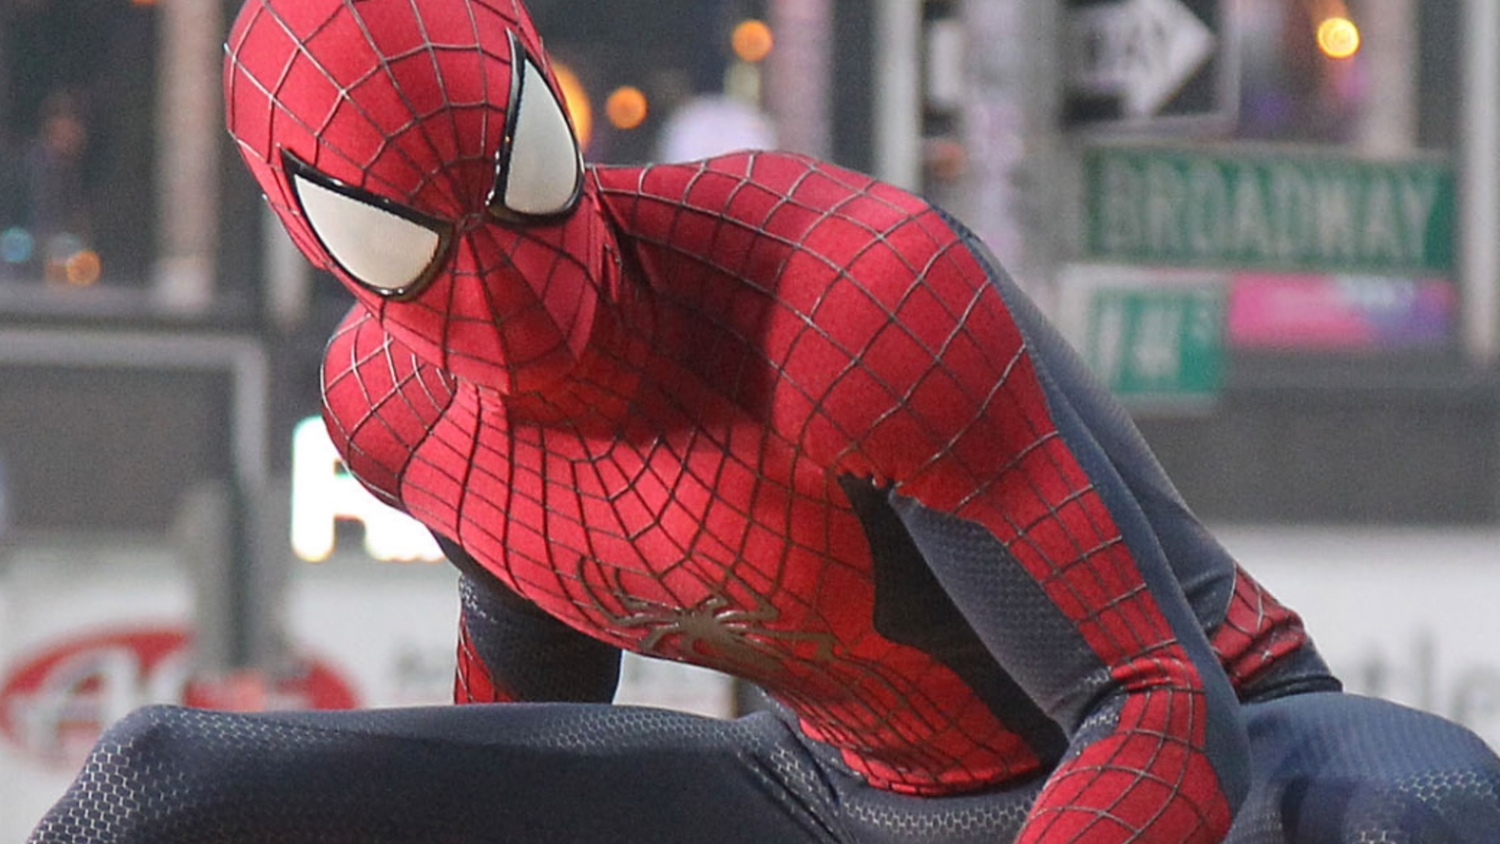 Like many of you, I assumed the reason that we haven’t seen Spider-Man in a...